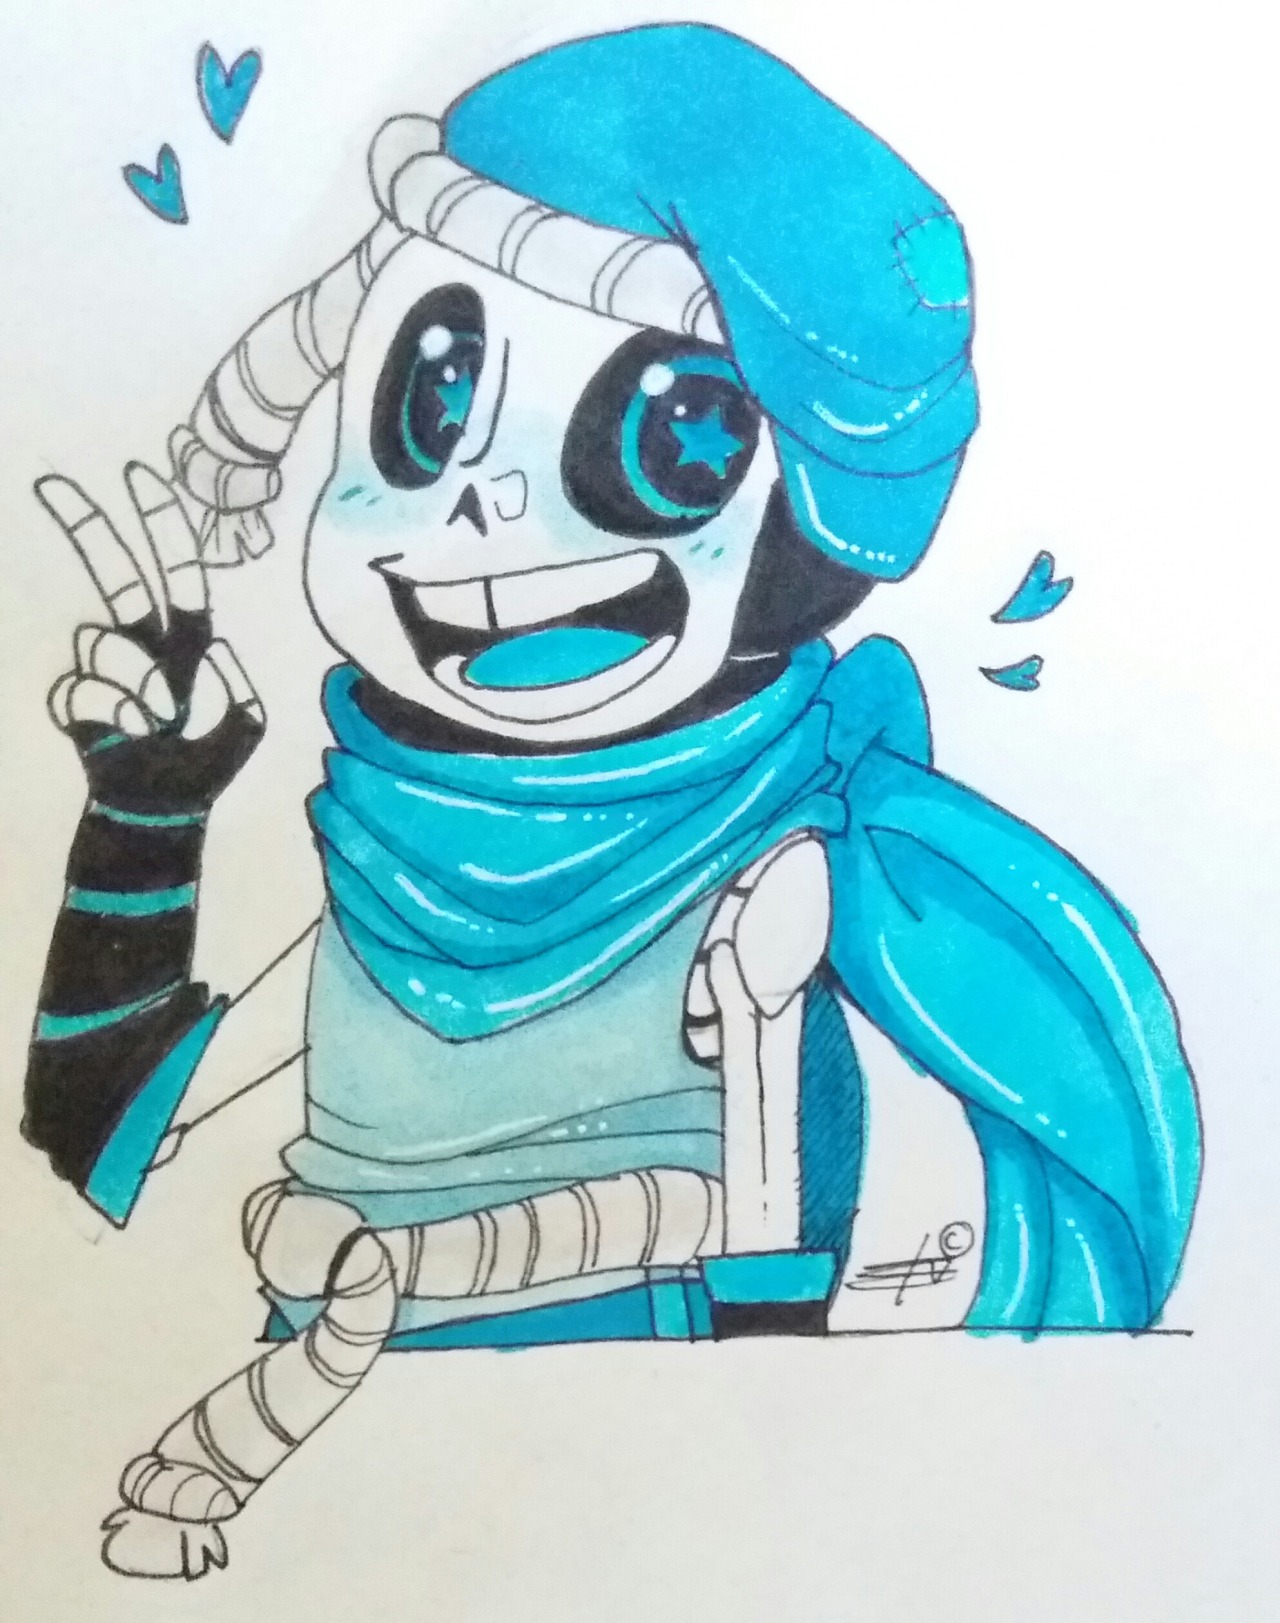 thesnowydream:
“ Here is Blublu, one of the cutest sans i’ve ever seen ~
Hope you like btw
Blublu belong to @blesstale
”
Ohwow it’s a Blublu!!
HE IS SO GOOD. LOOK AT HIS SMILE!
Damn you cant even imagine how I love getting fanart of Blublu in his...